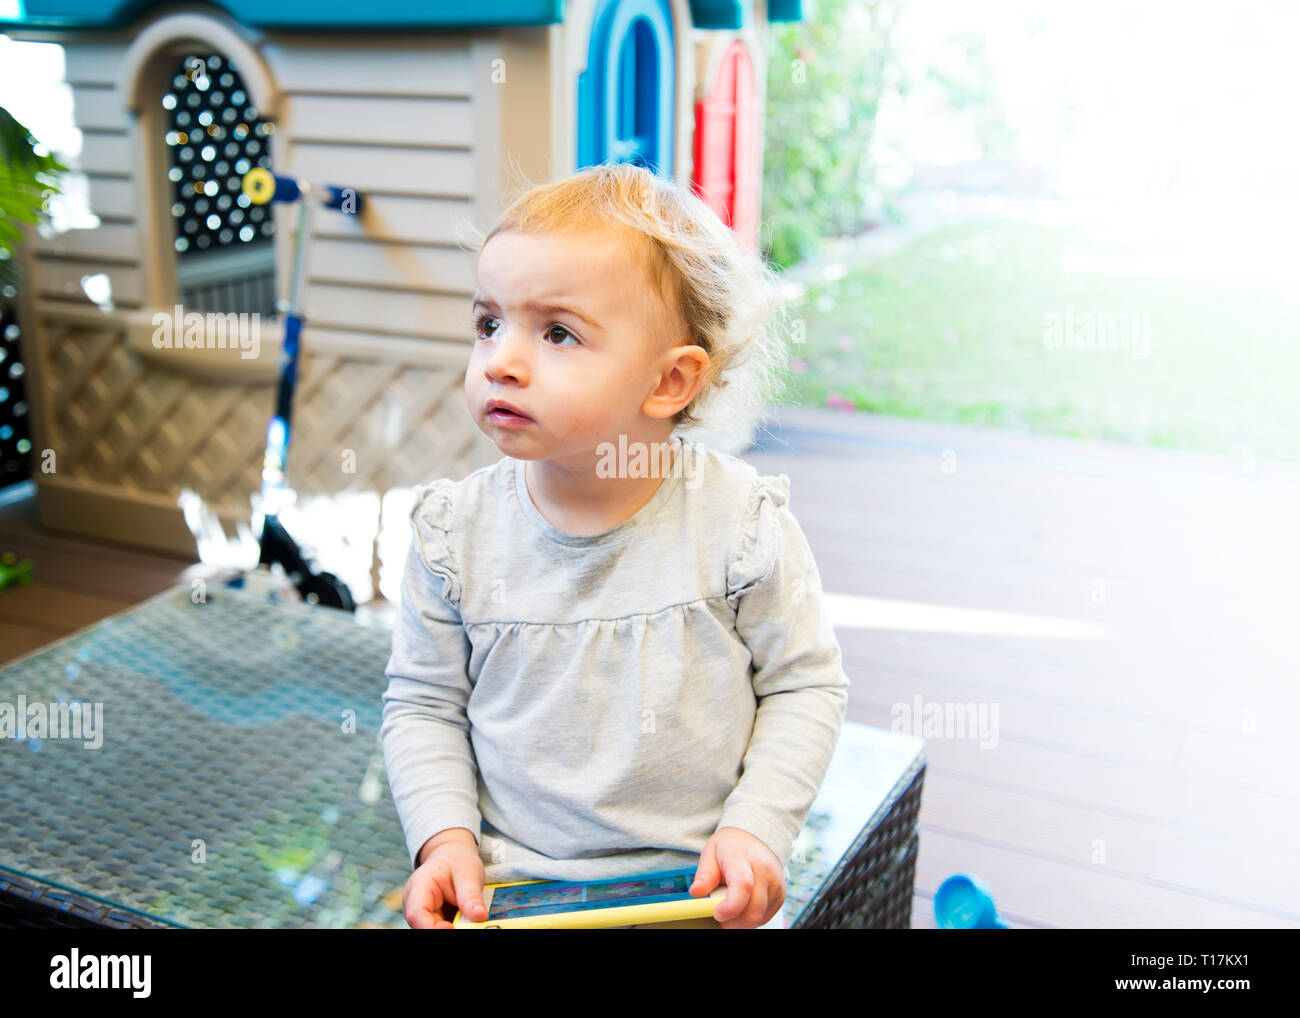 young girl 3yrs old looking to right, with a bored,facial expression  sitting in garden. Stock Photo